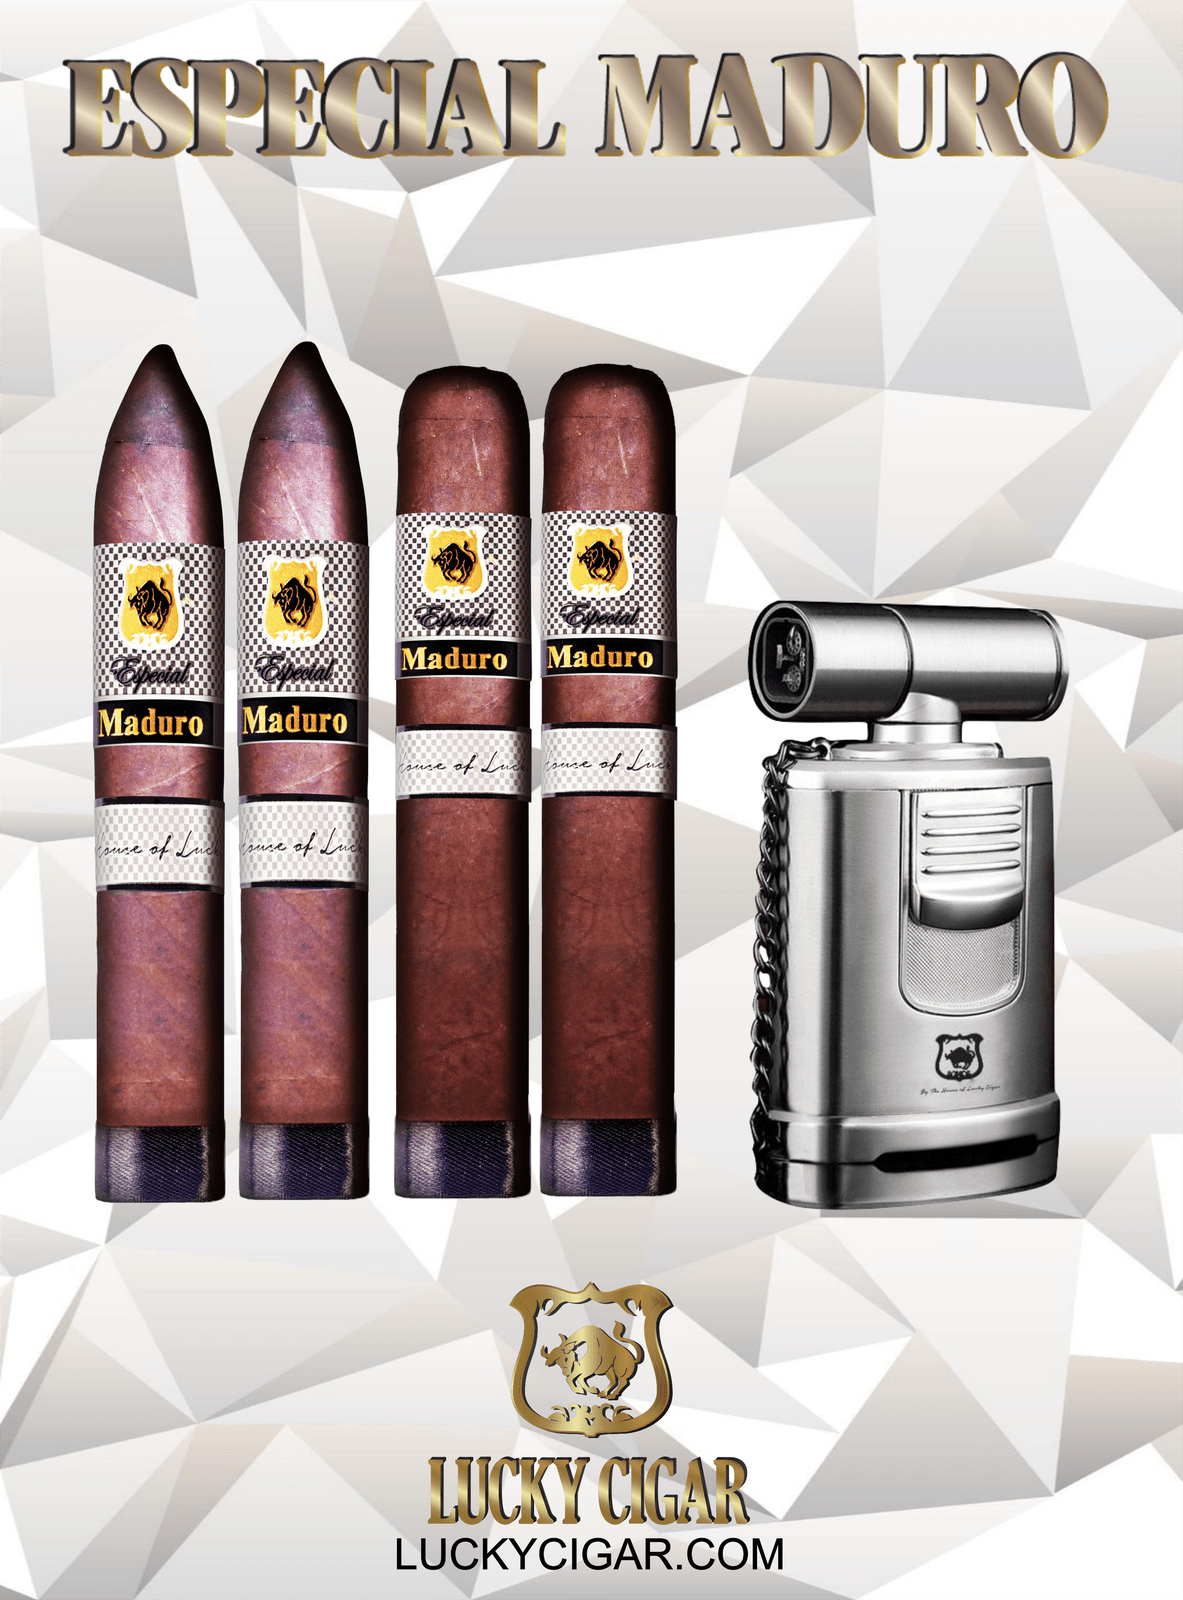 Maduro Cigars: Especial Maduro by Lucky Cigar: Set of 4 Cigars, 2 Toro, 2 Torpedo with Torch